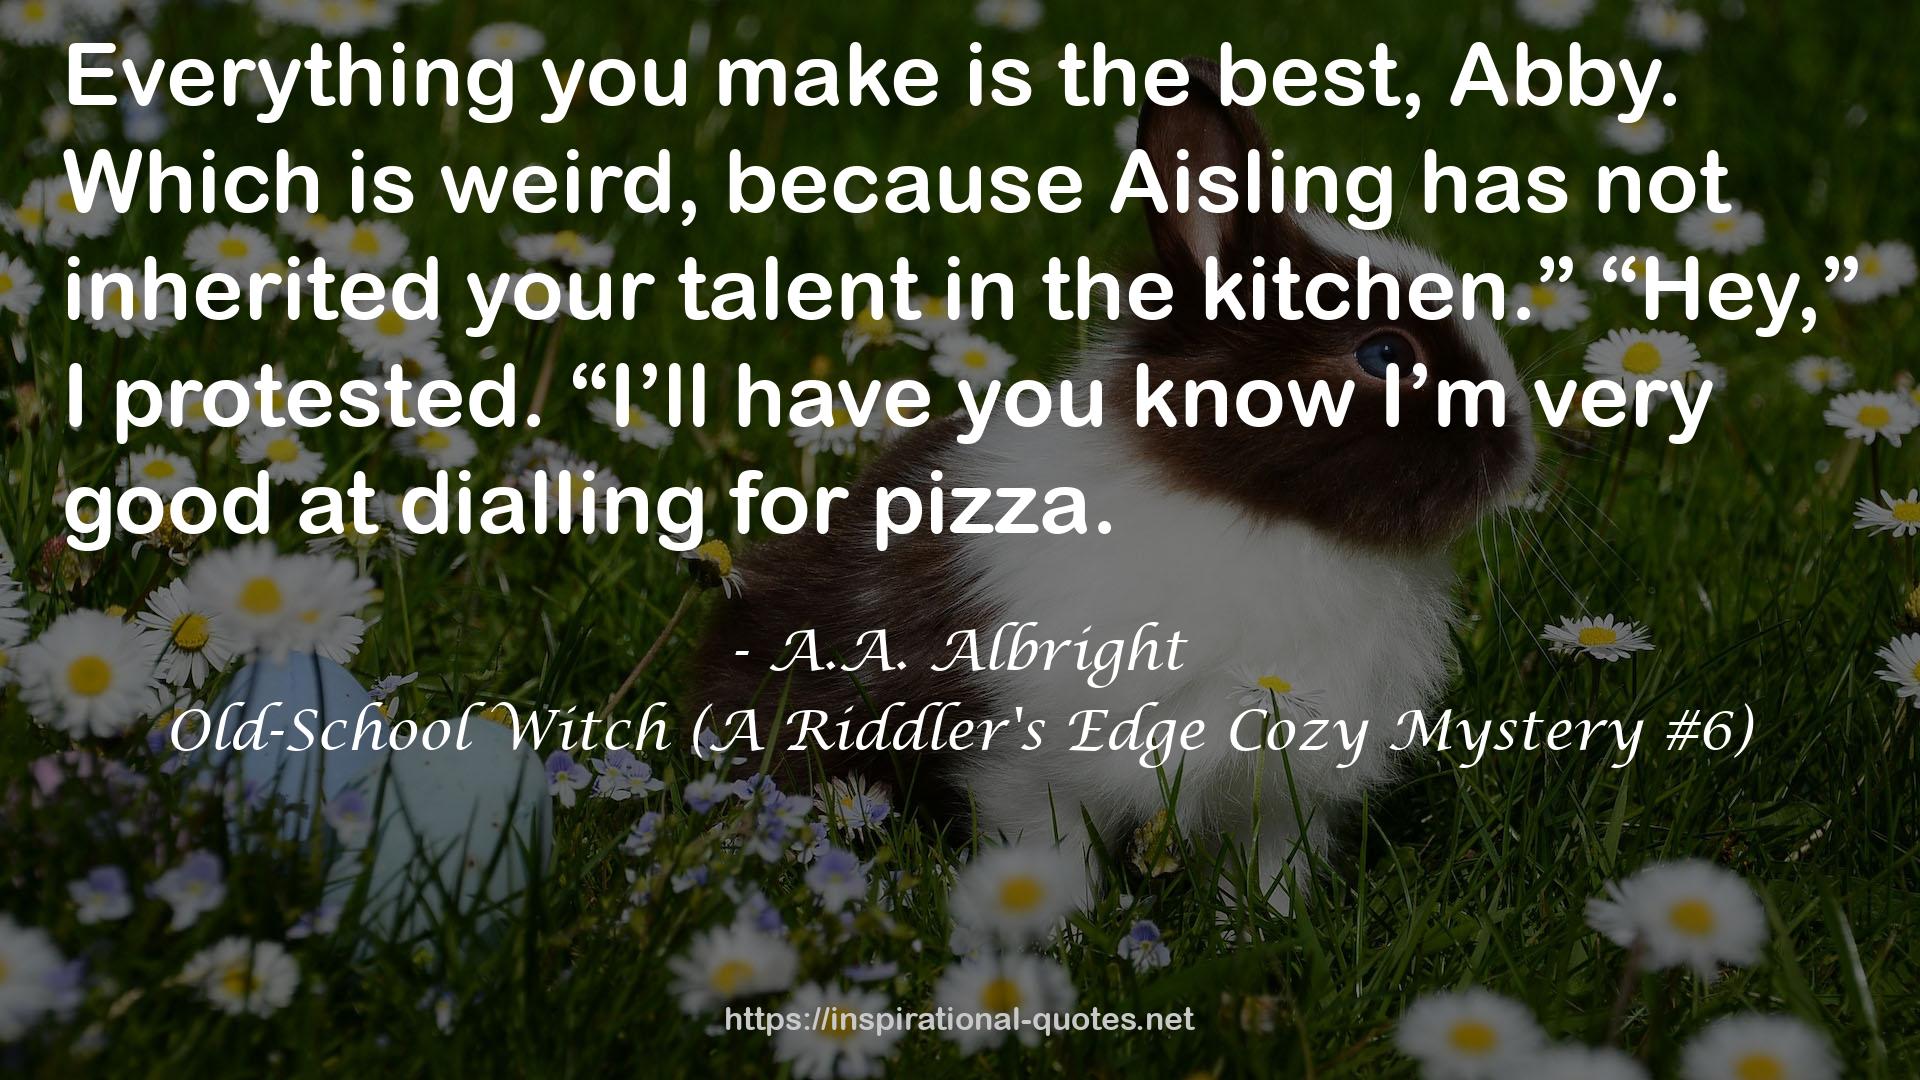 Old-School Witch (A Riddler's Edge Cozy Mystery #6) QUOTES